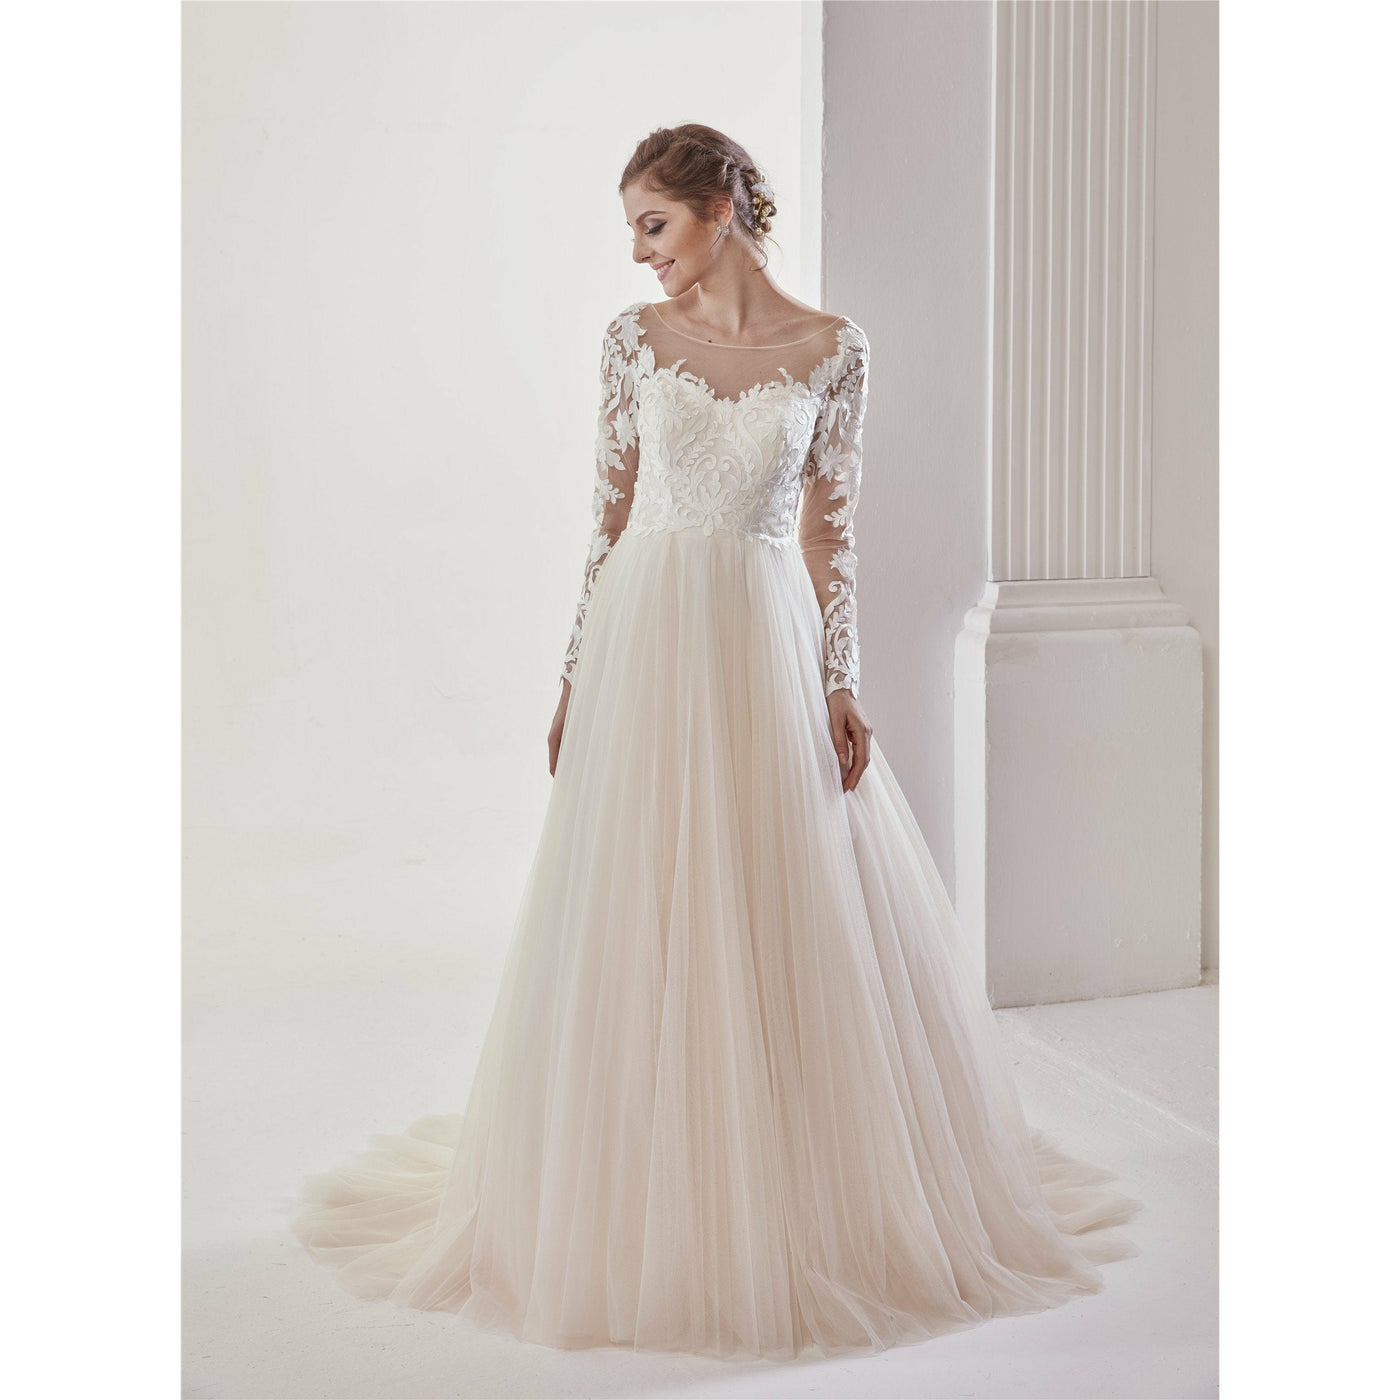 Chicely Long sleeves floral applique A-line wedding dress